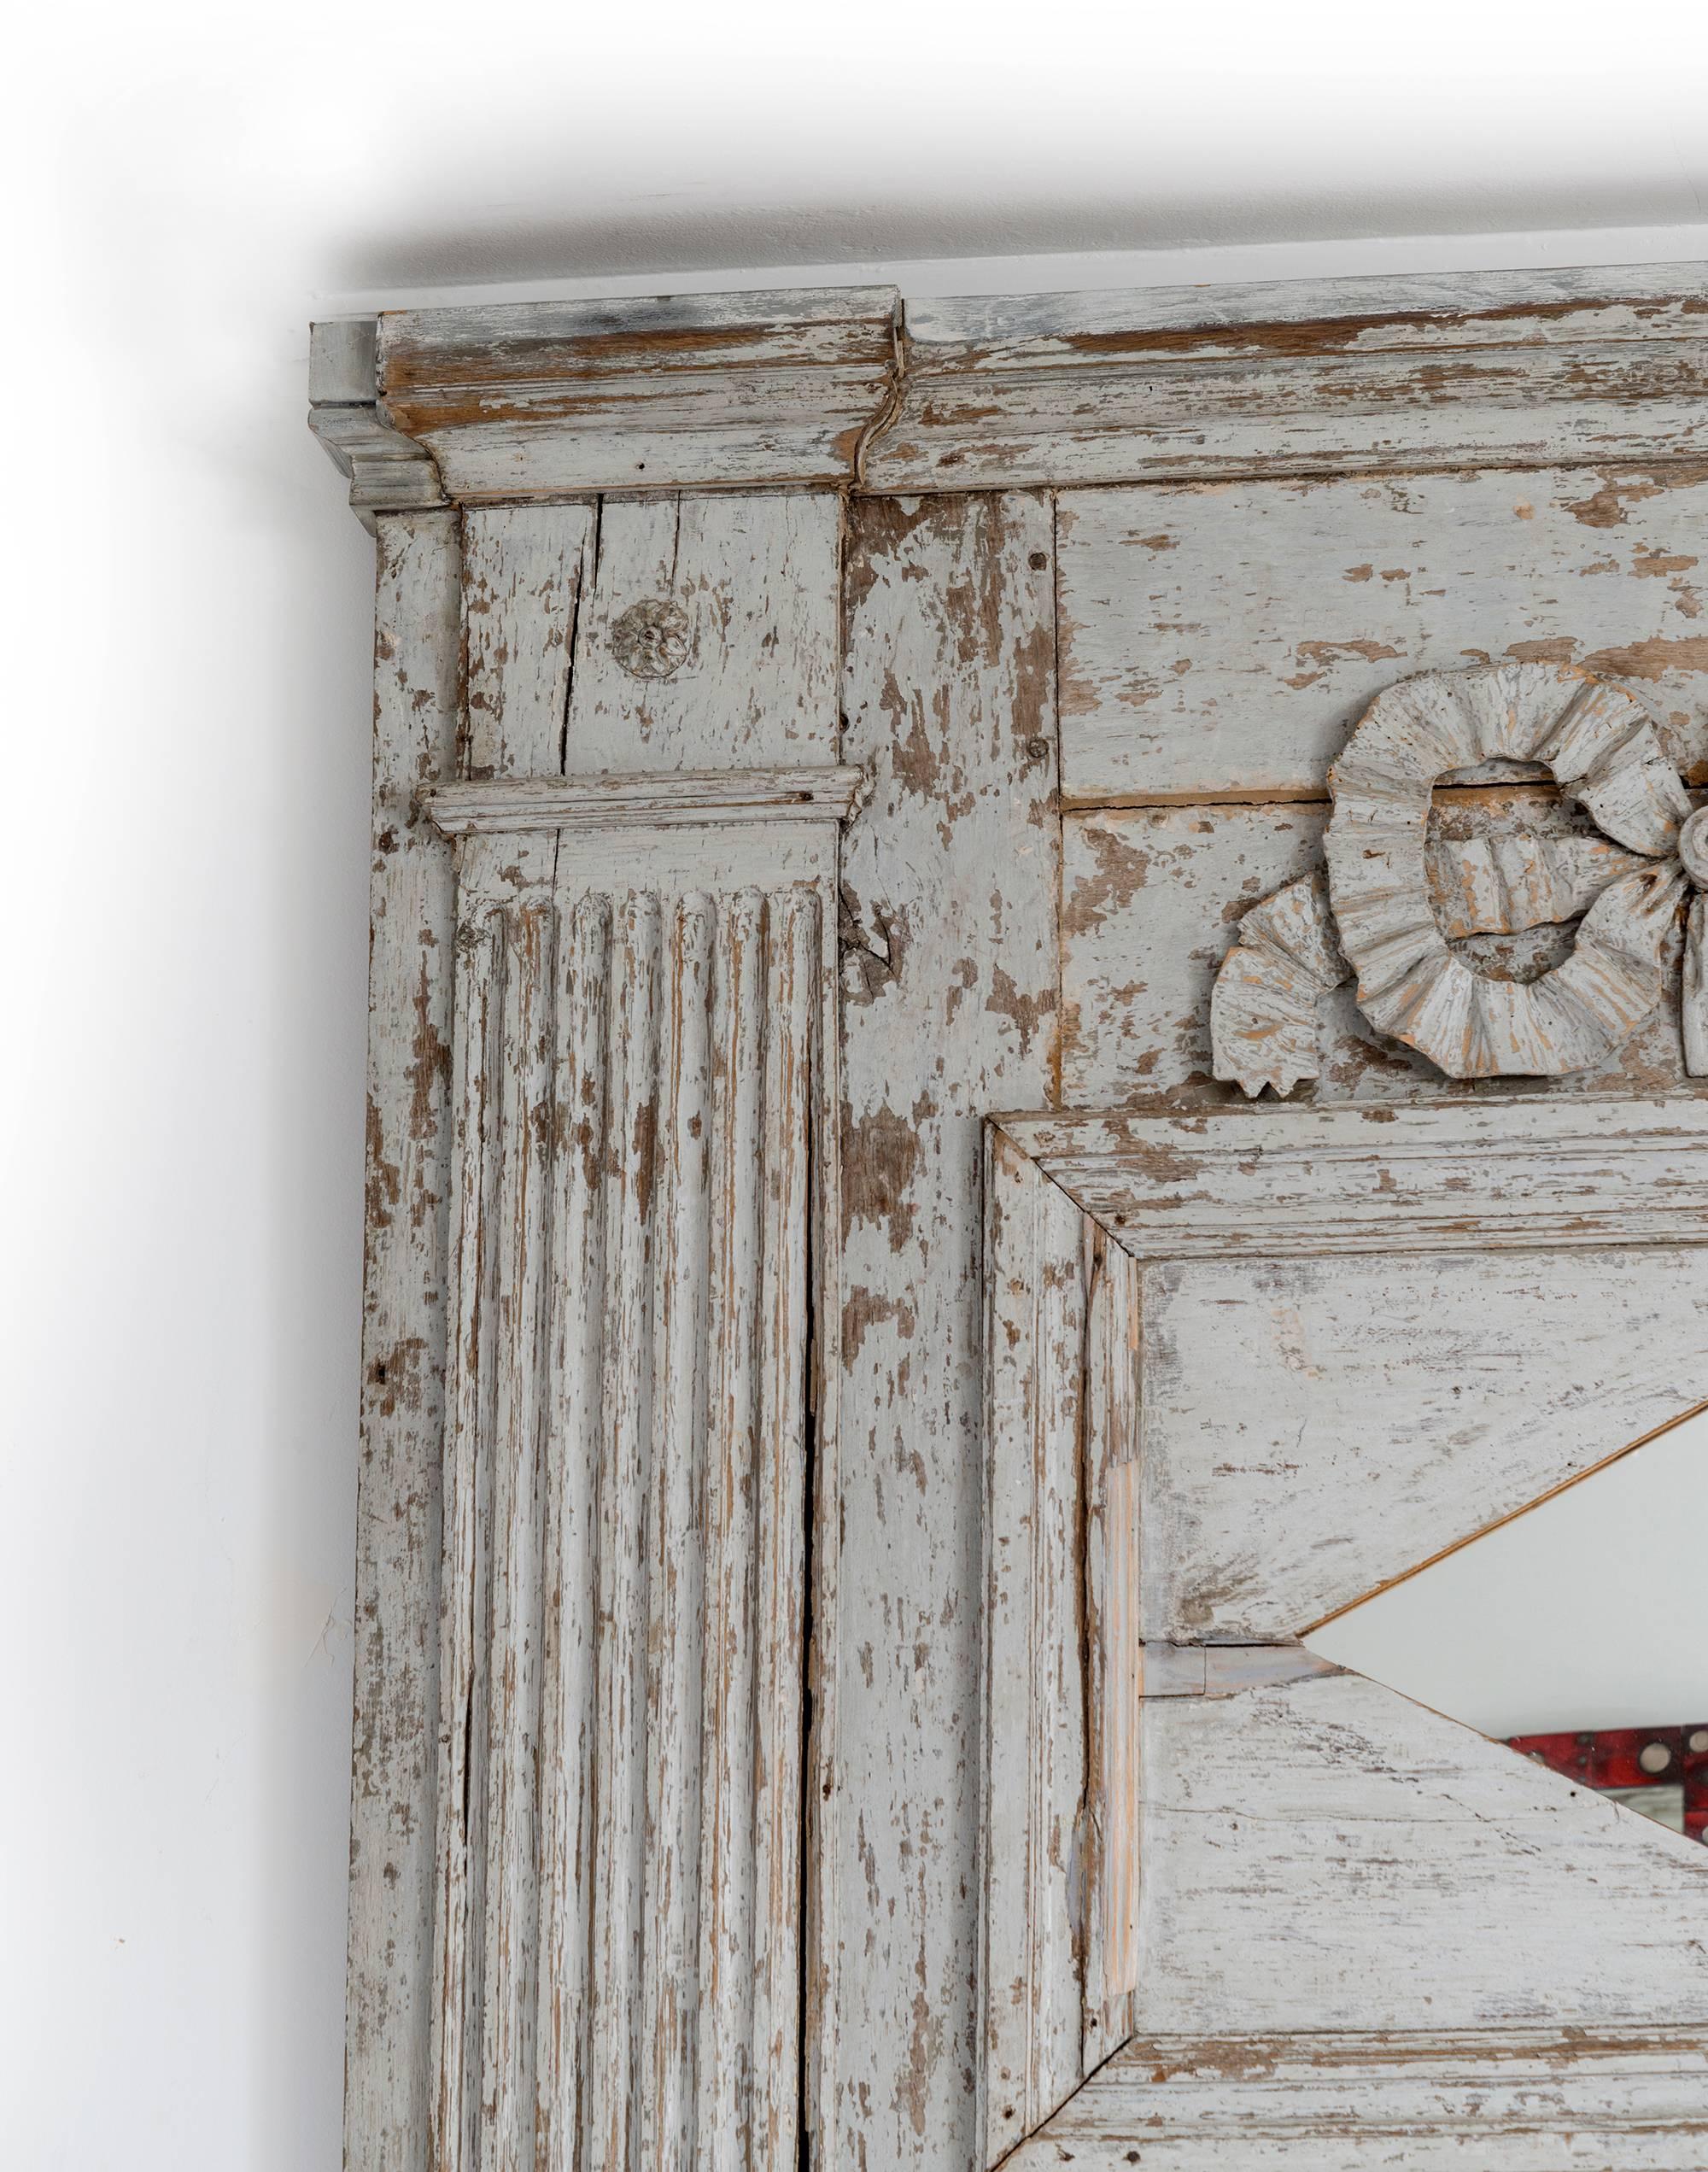 French, circa 1780. A very rare large-scale white painted Louis XVI trumeau mirror, decorated with carved wood Corinthian columns. This piece has been featured in Maison de Luxe from 2016 and showcased by famous interior designers. An incredible